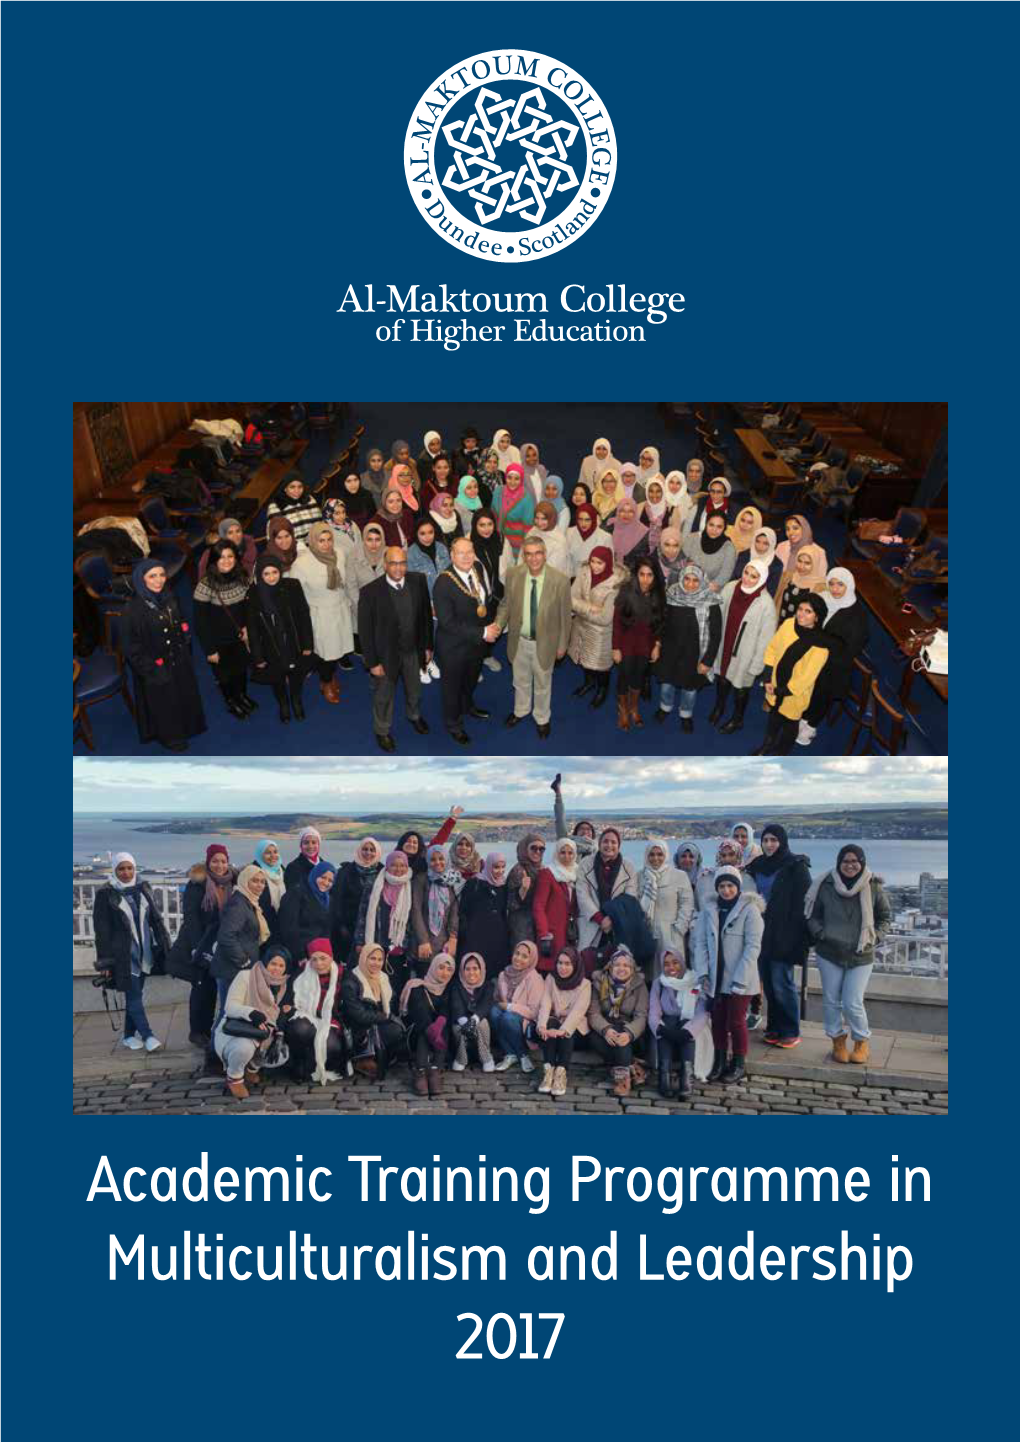 Academic Training Programme in Multiculturalism and Leadership 2017 Contents